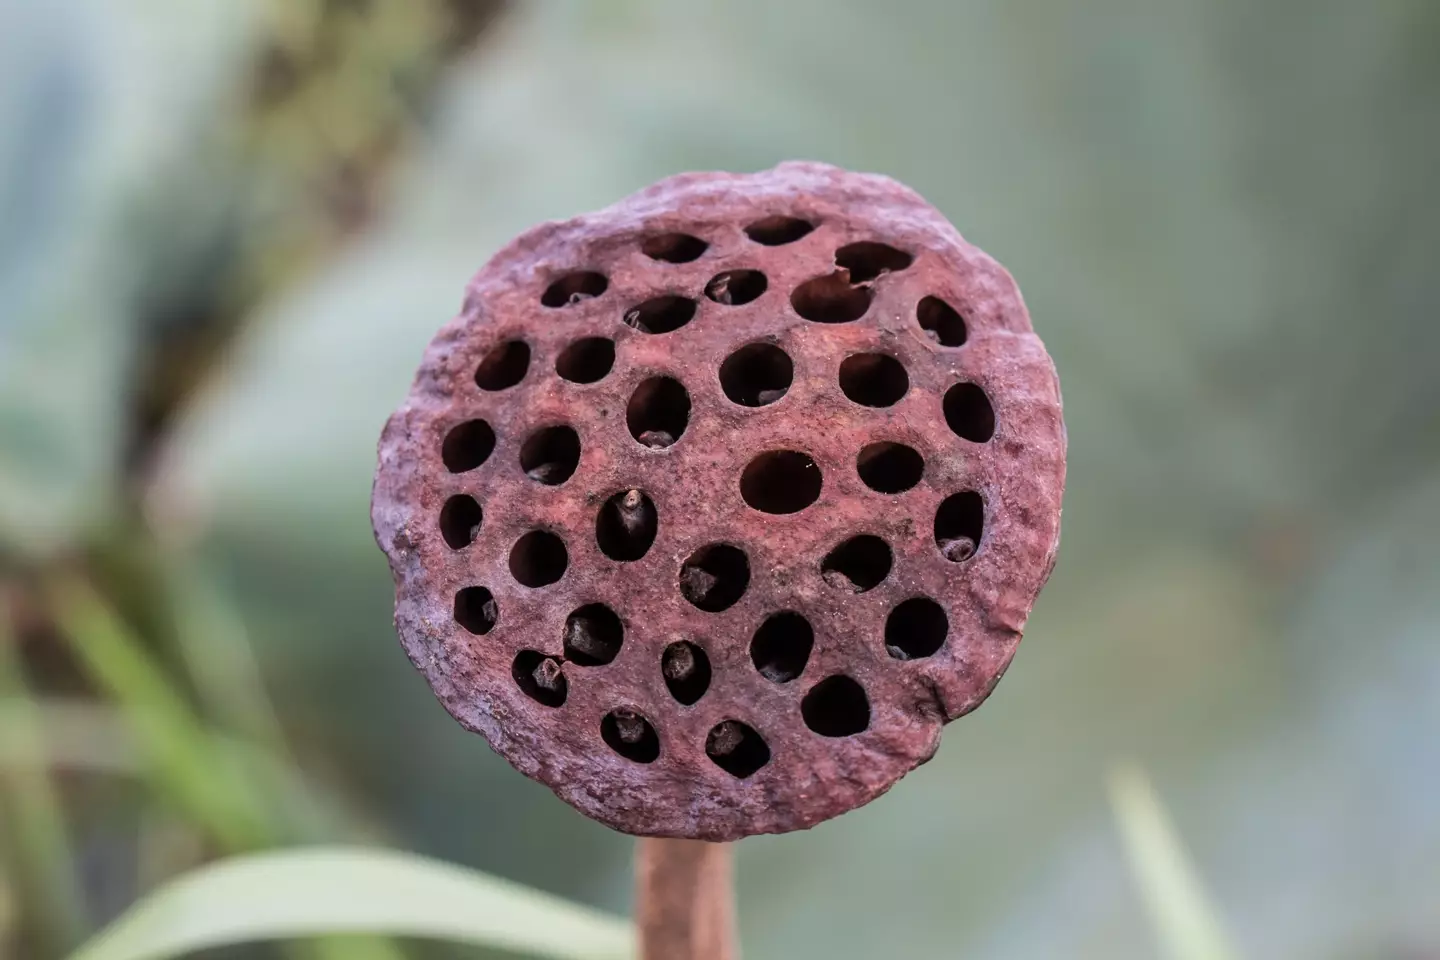 A lotus seed can be a source of trypophobia.